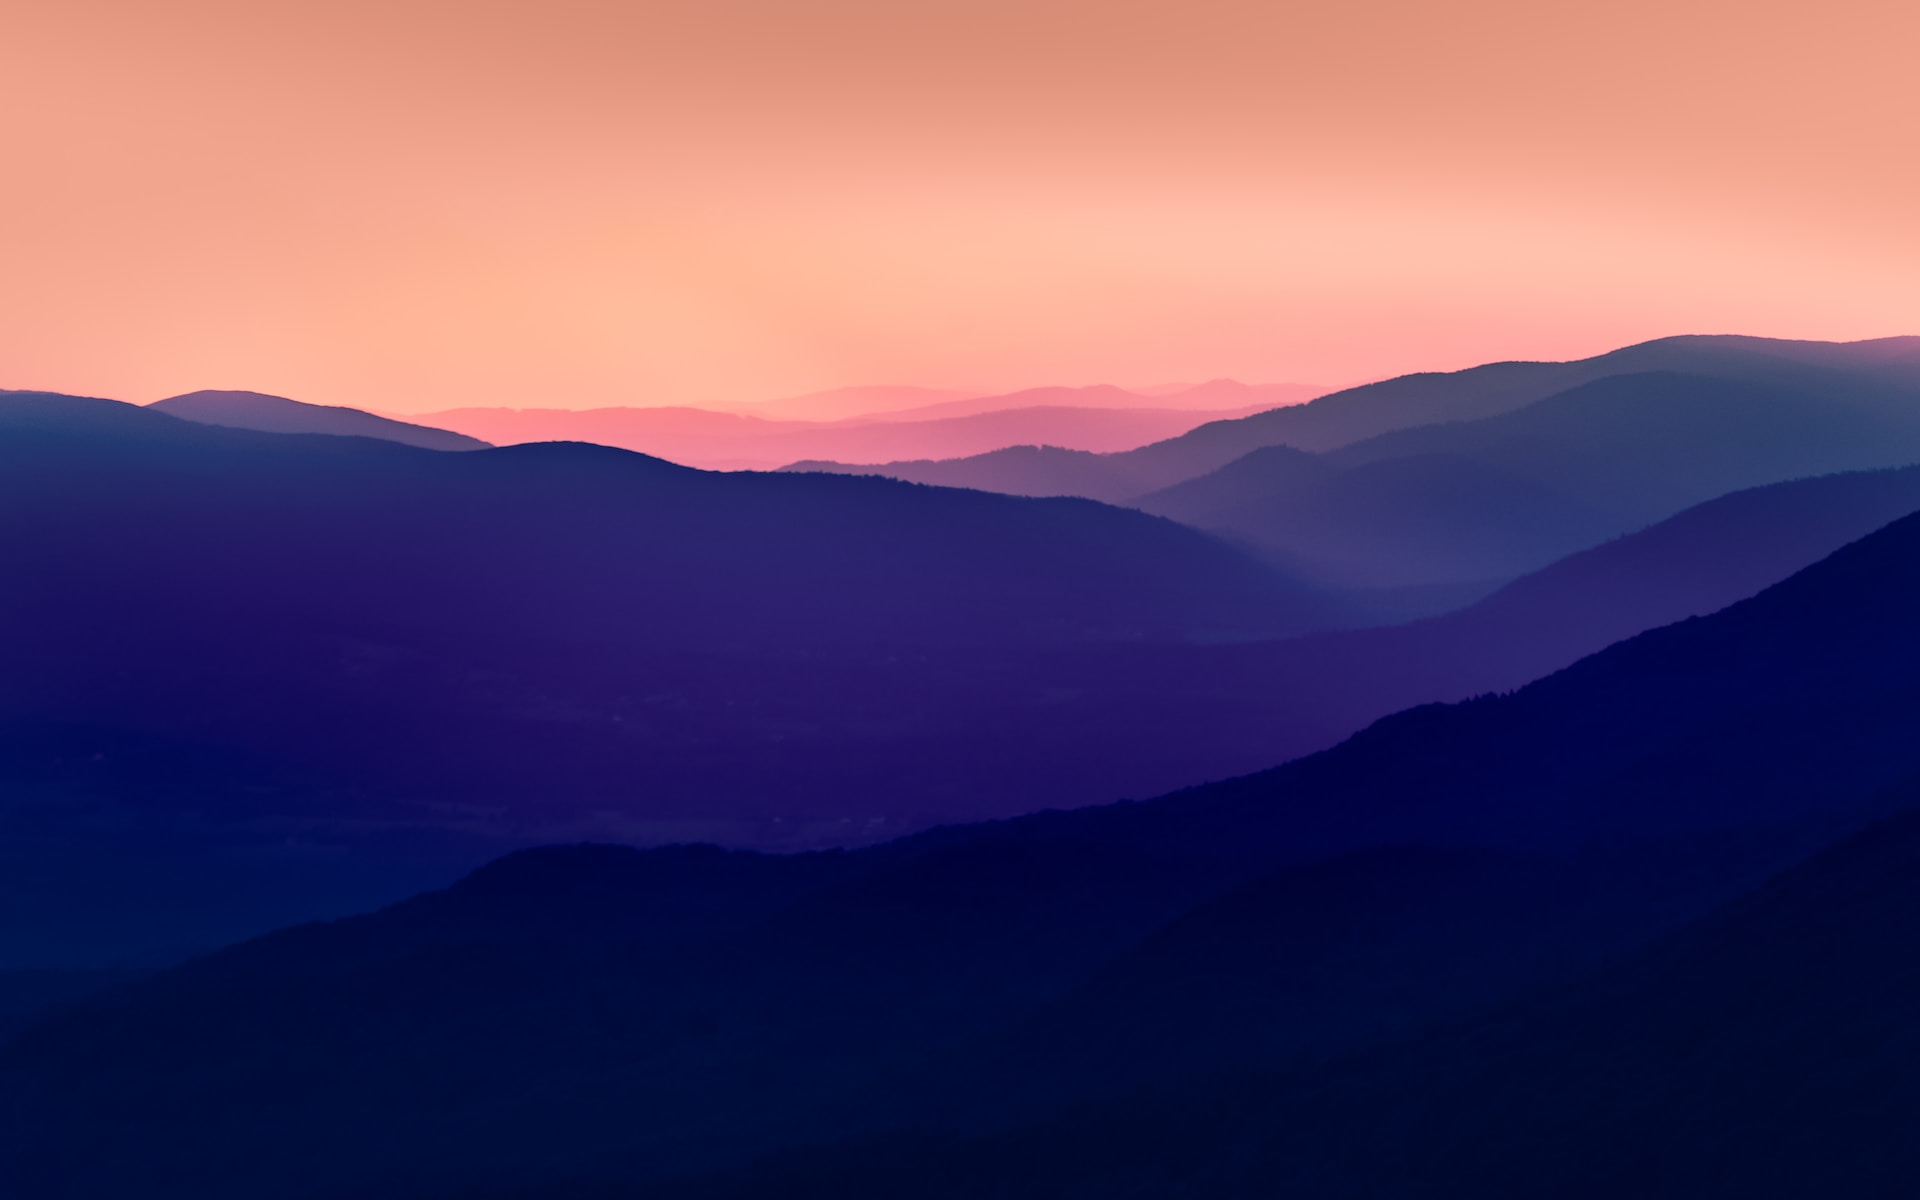 Evening sky above mountains